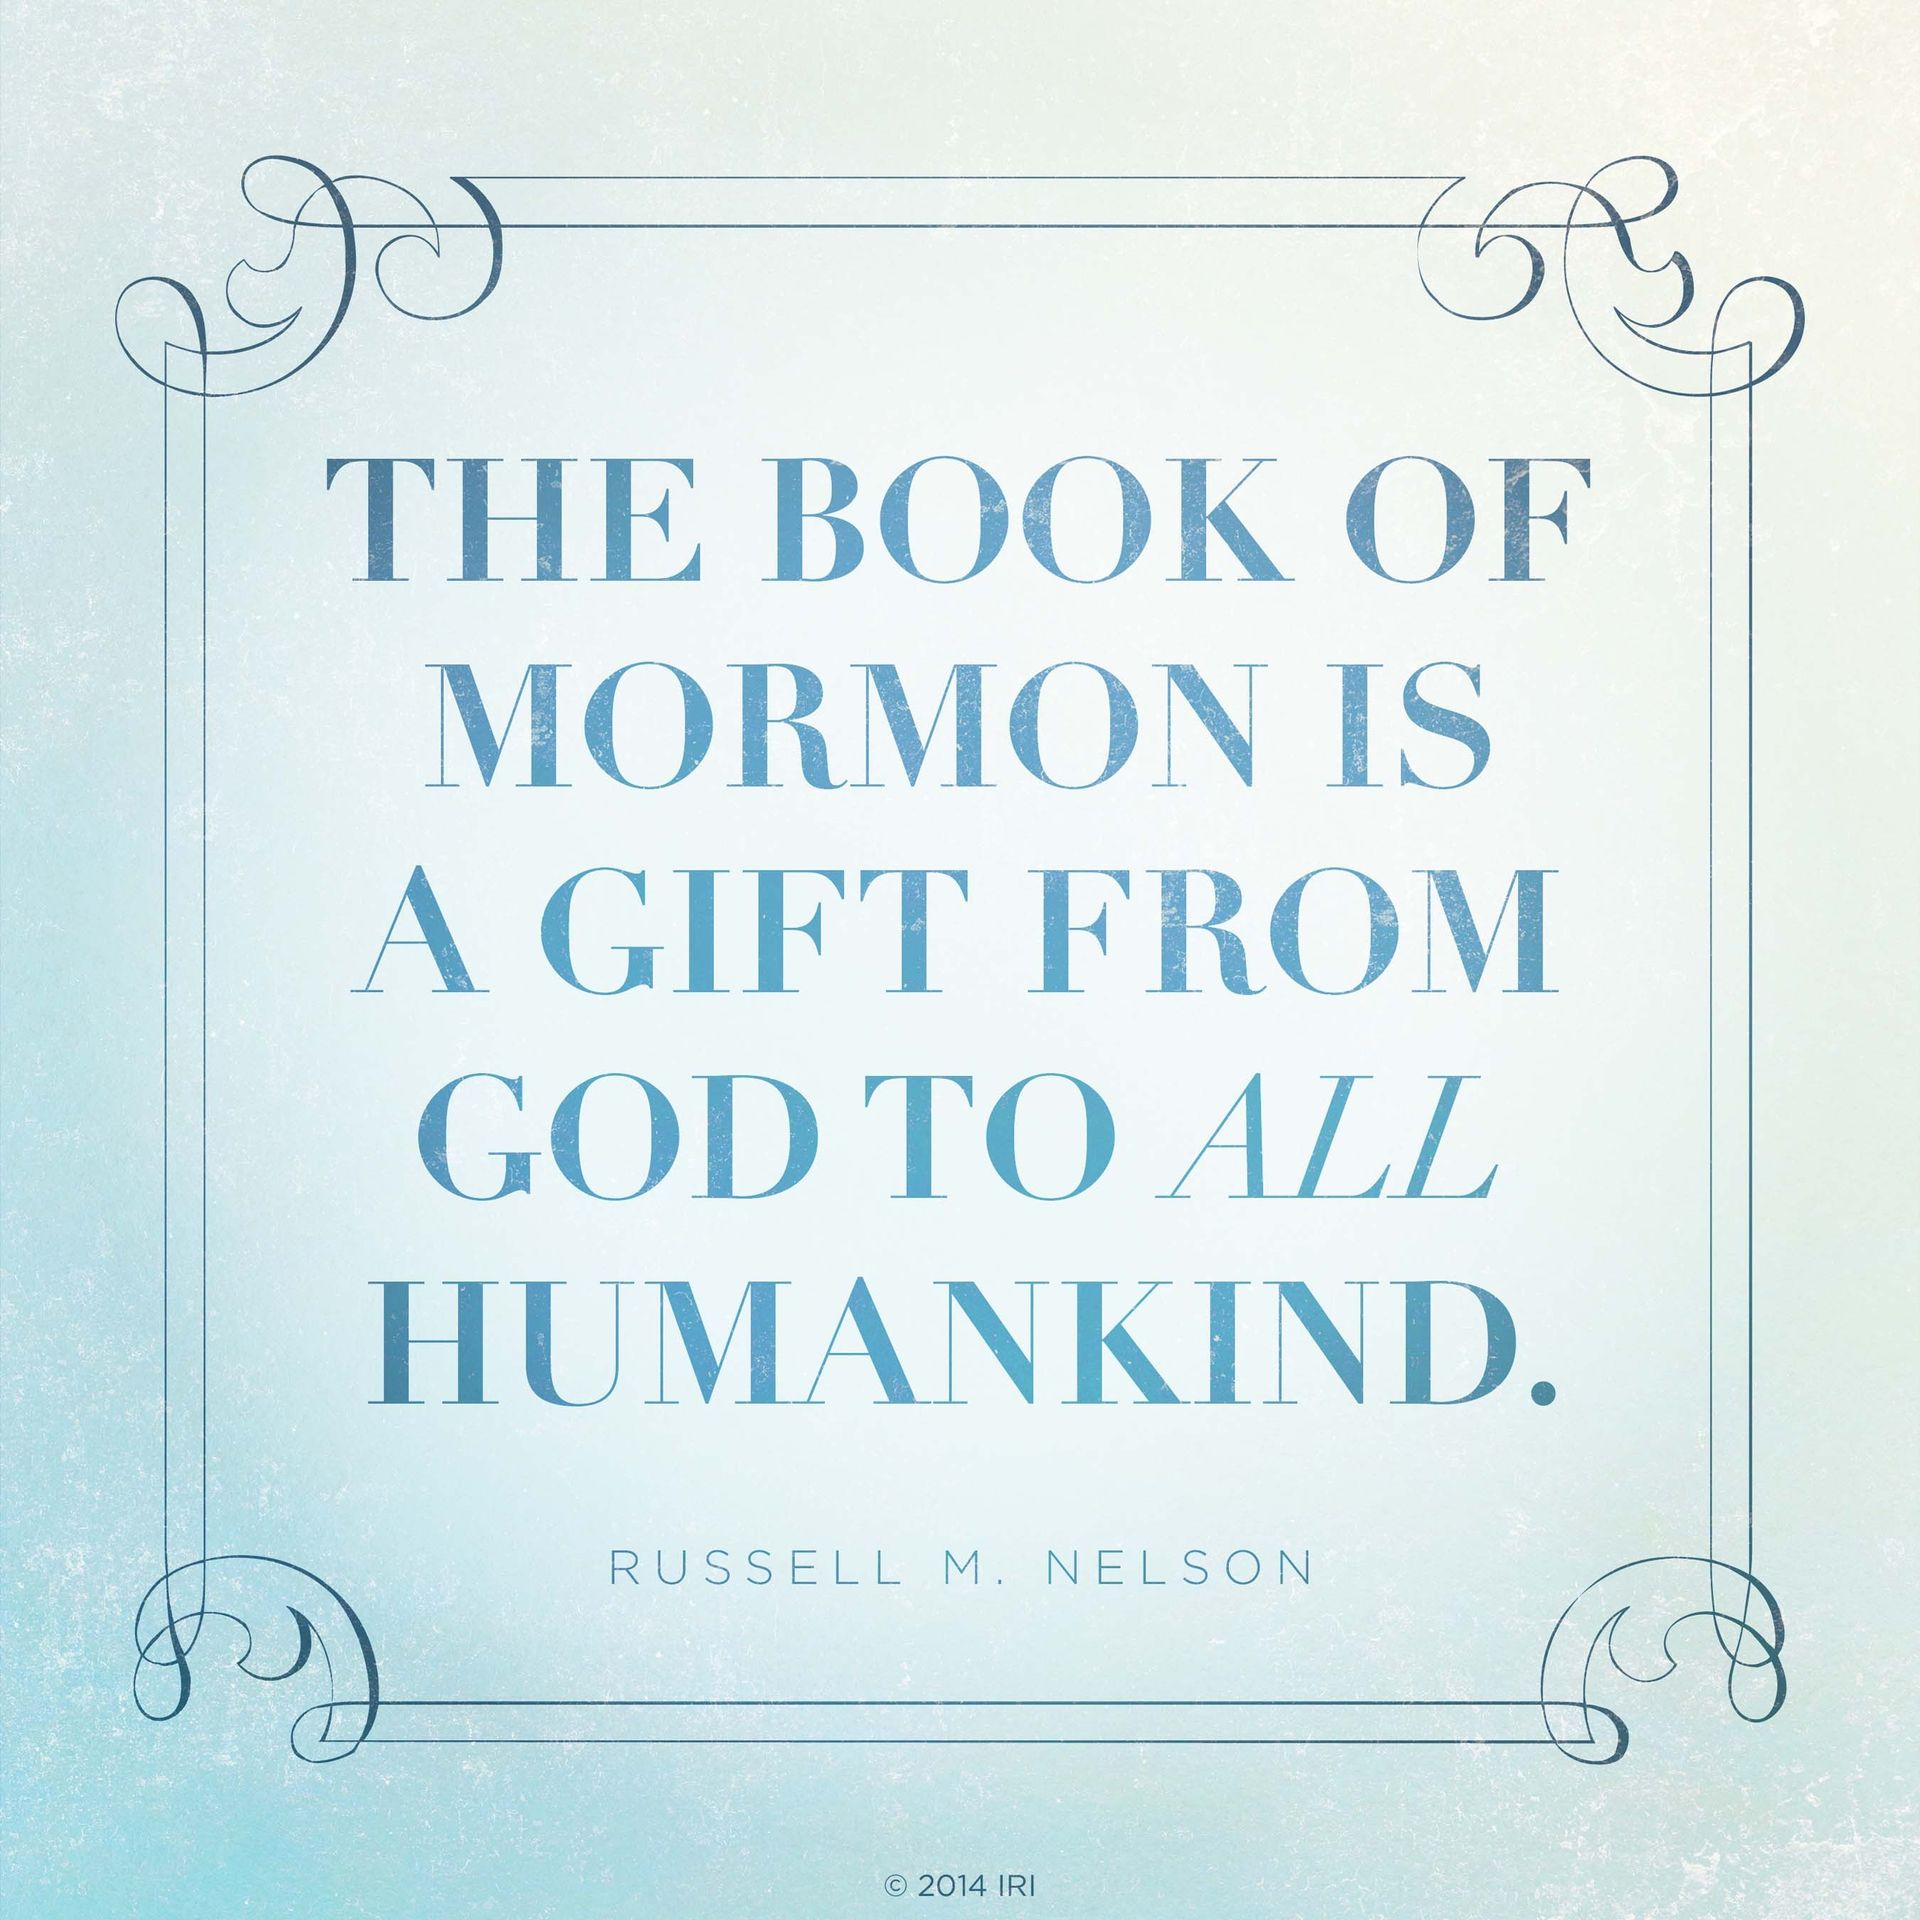 “The Book of Mormon is a gift from God to all humankind.”—President Russell M. Nelson, “A Testimony of the Book of Mormon”